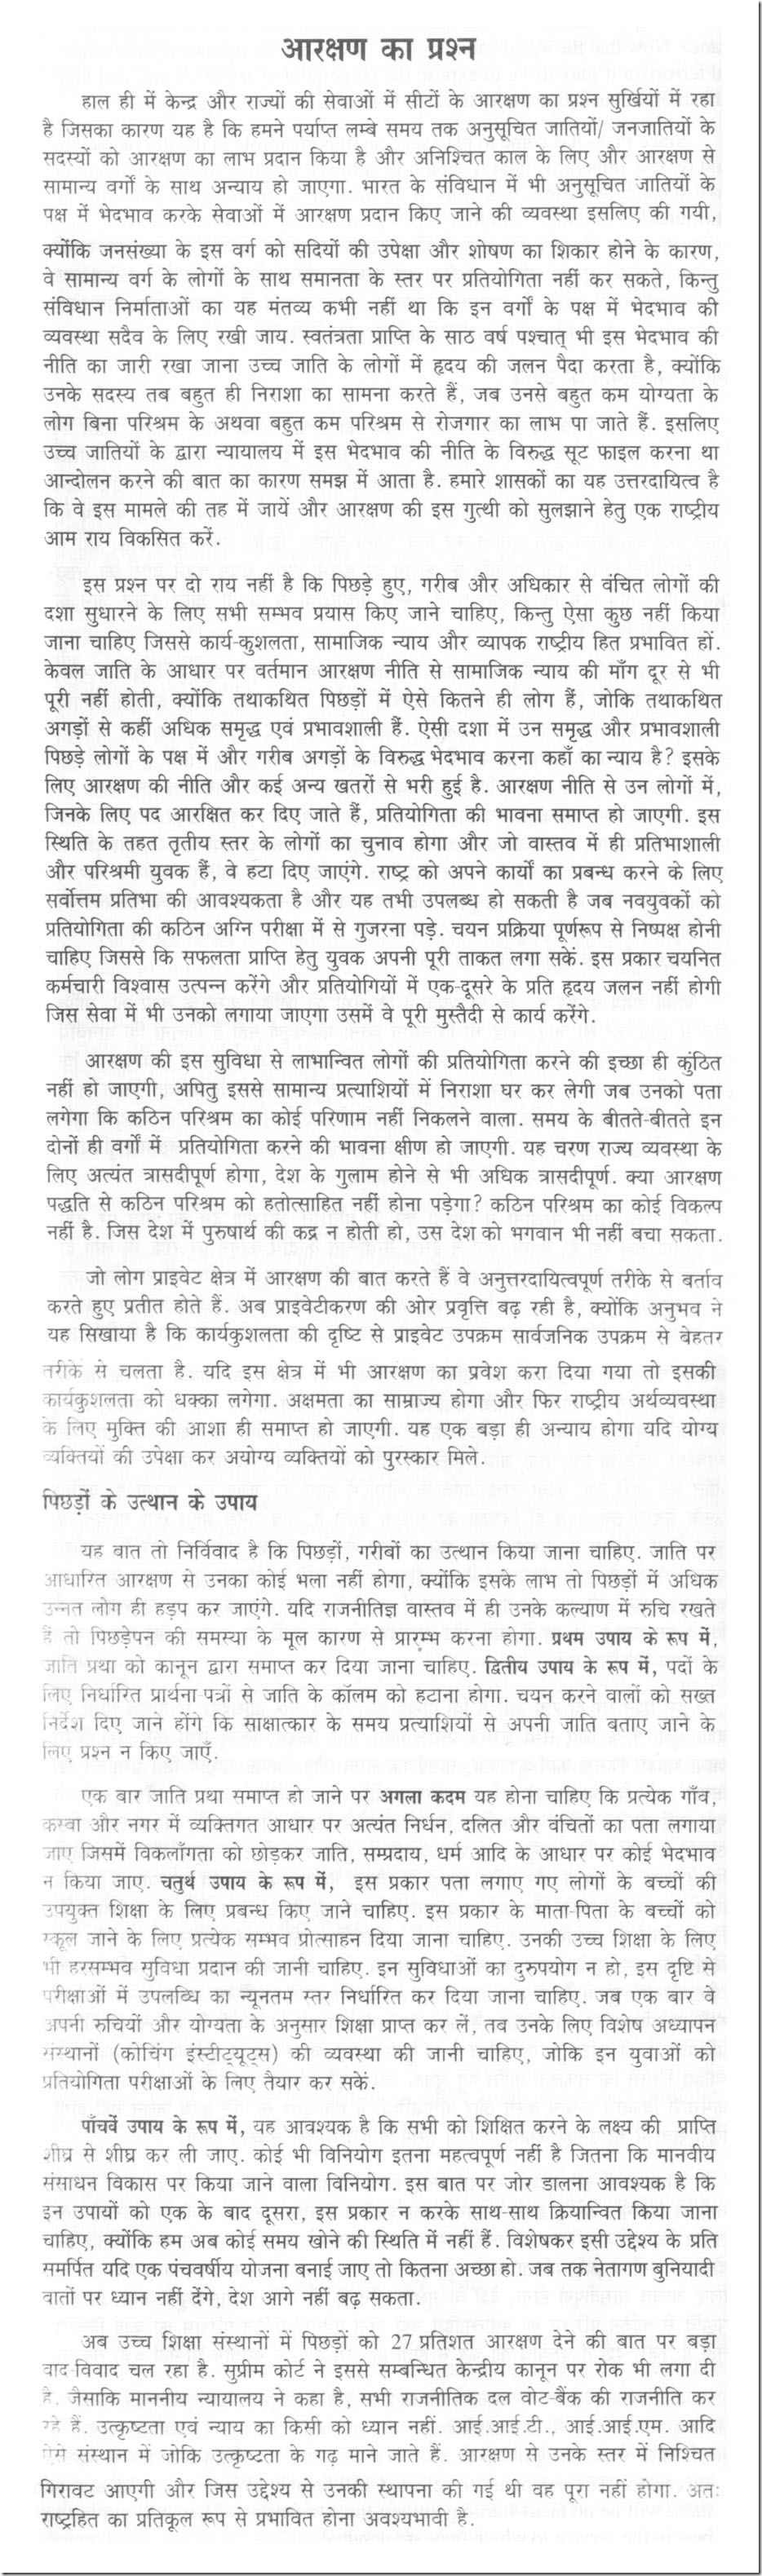 Essay on mothers love in hindi